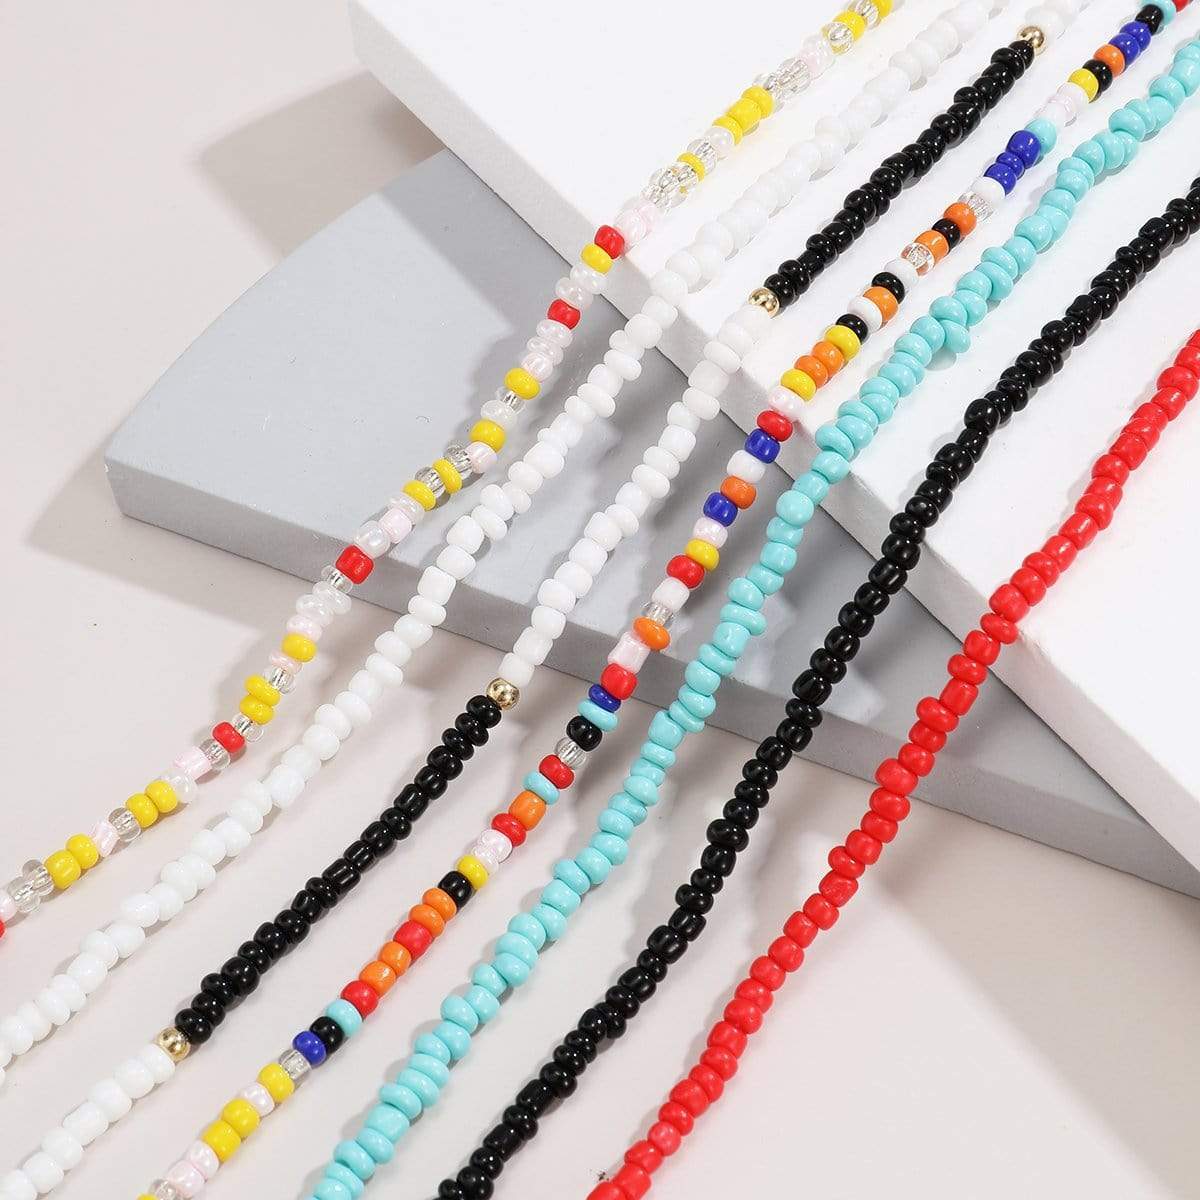 Bohemian Layered Colorful Seed Beaded Choker Necklace Set